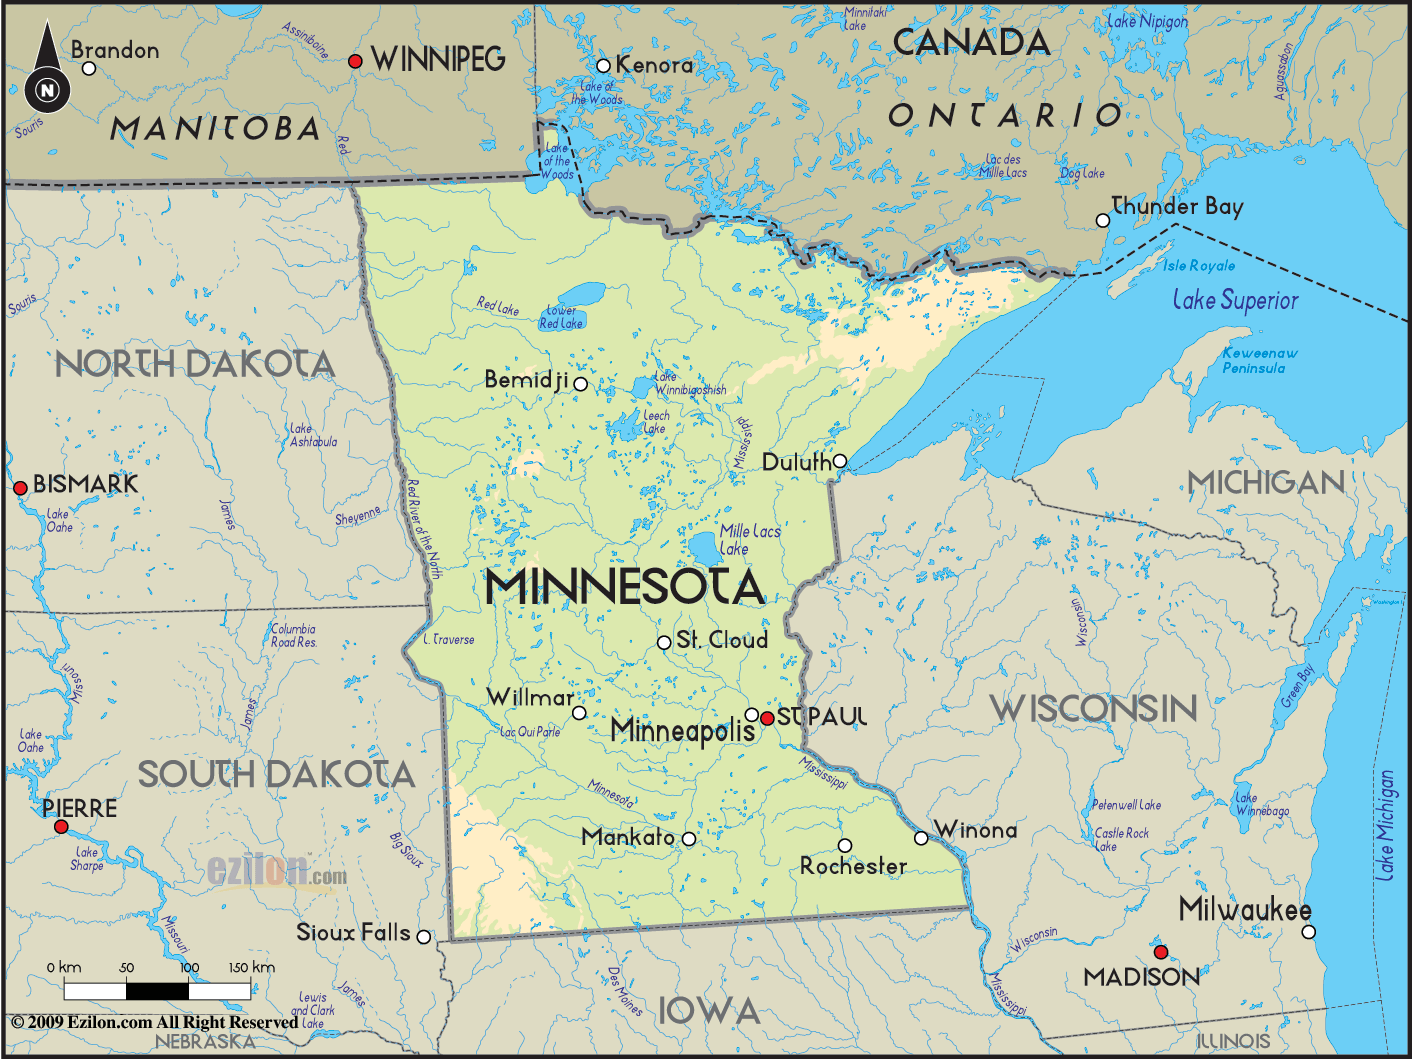 congressional-run-in-minnesota-published-by-alex-mckeon-on-day-1-342-page-1-of-1